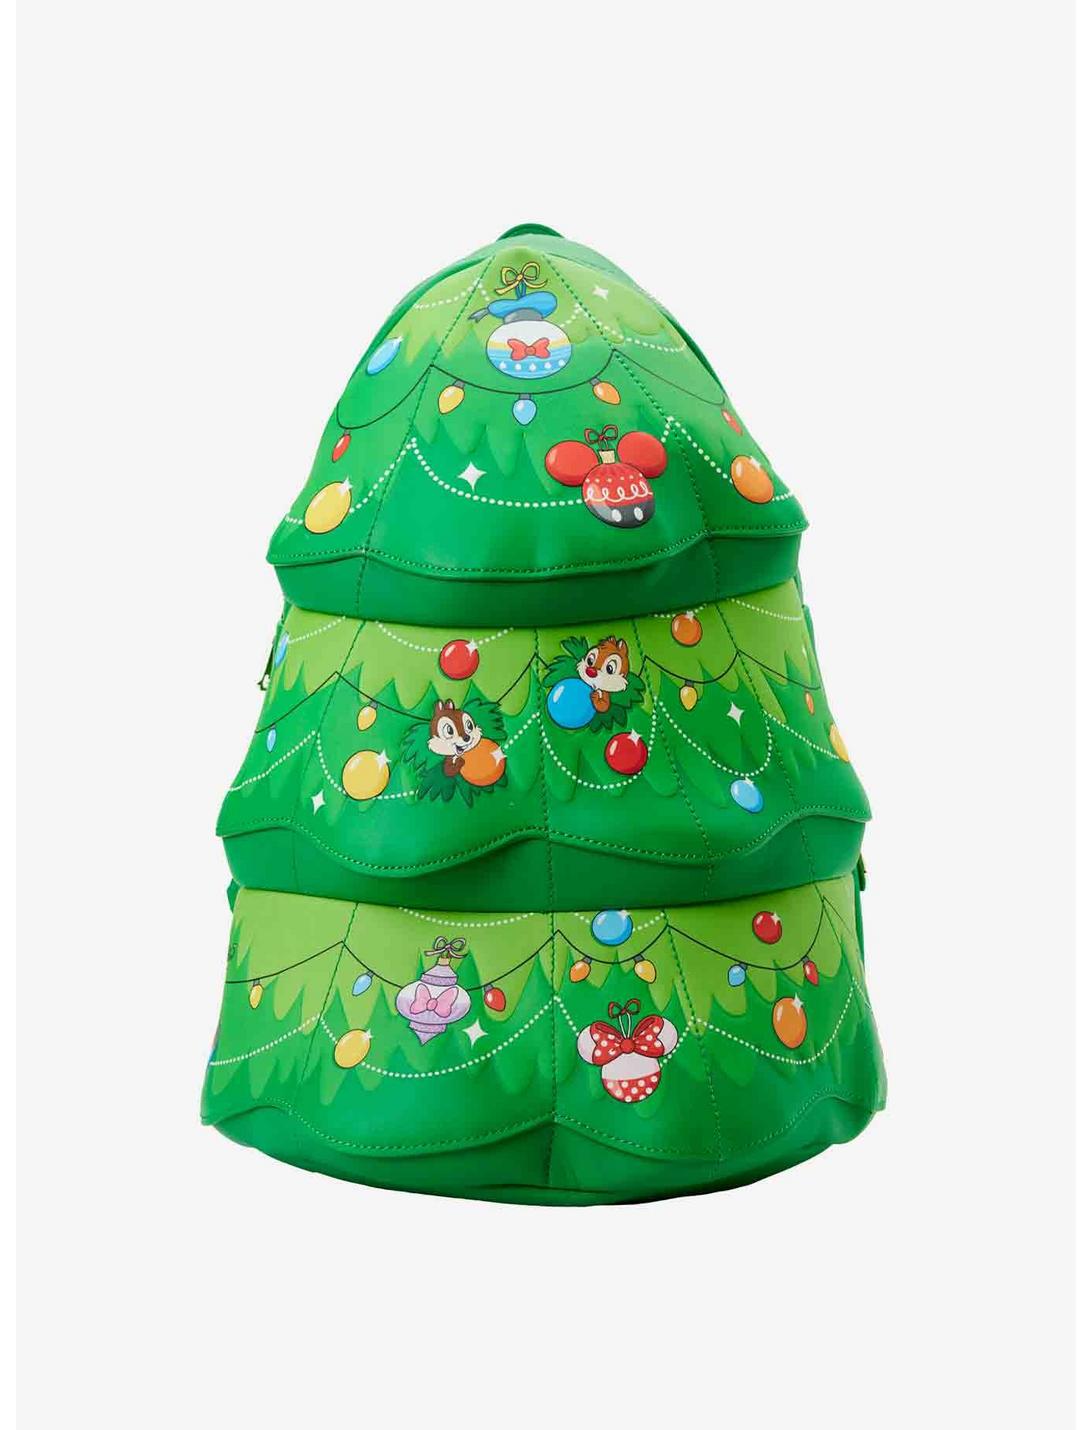 Loungefly Disney Chip 'N Dale Christmas Tree Mini Backpack, , hi-res